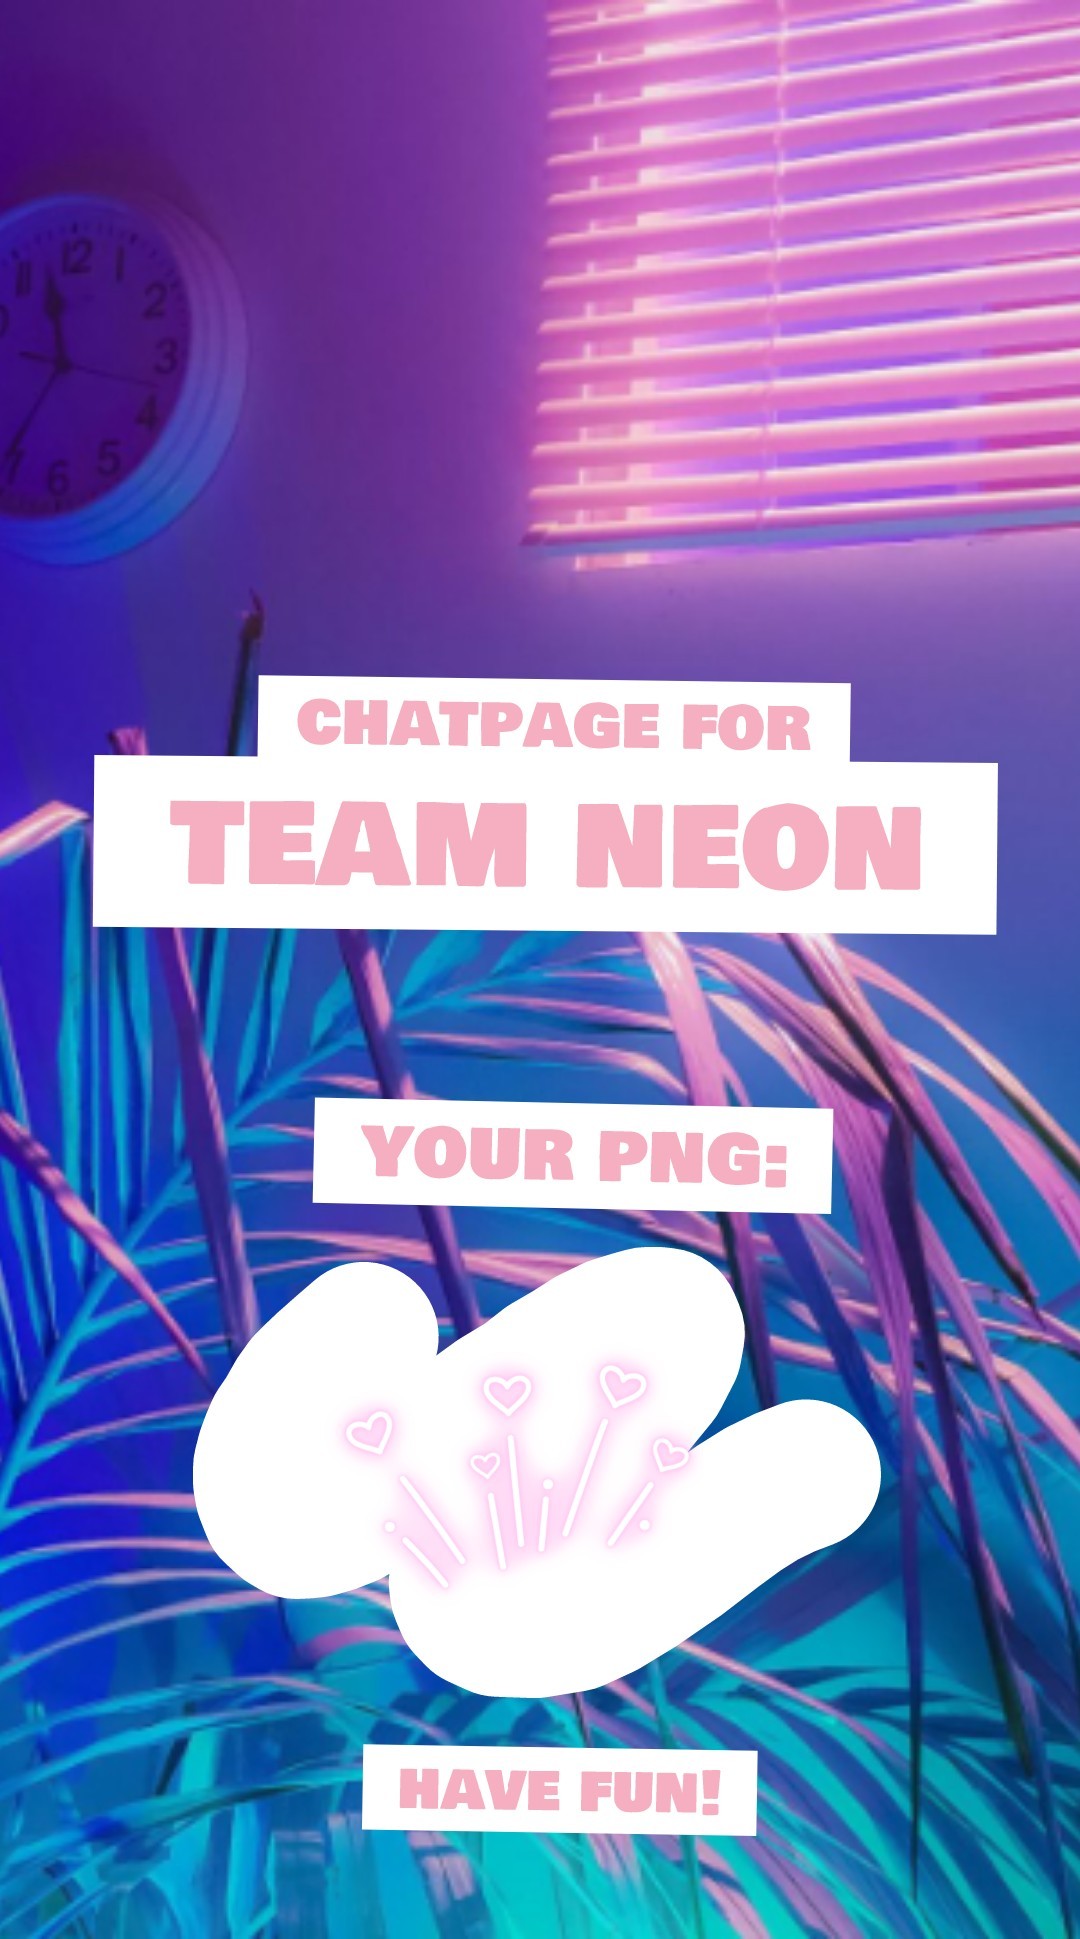 ~✨~

team neon chatpage

have fun!

~✨~